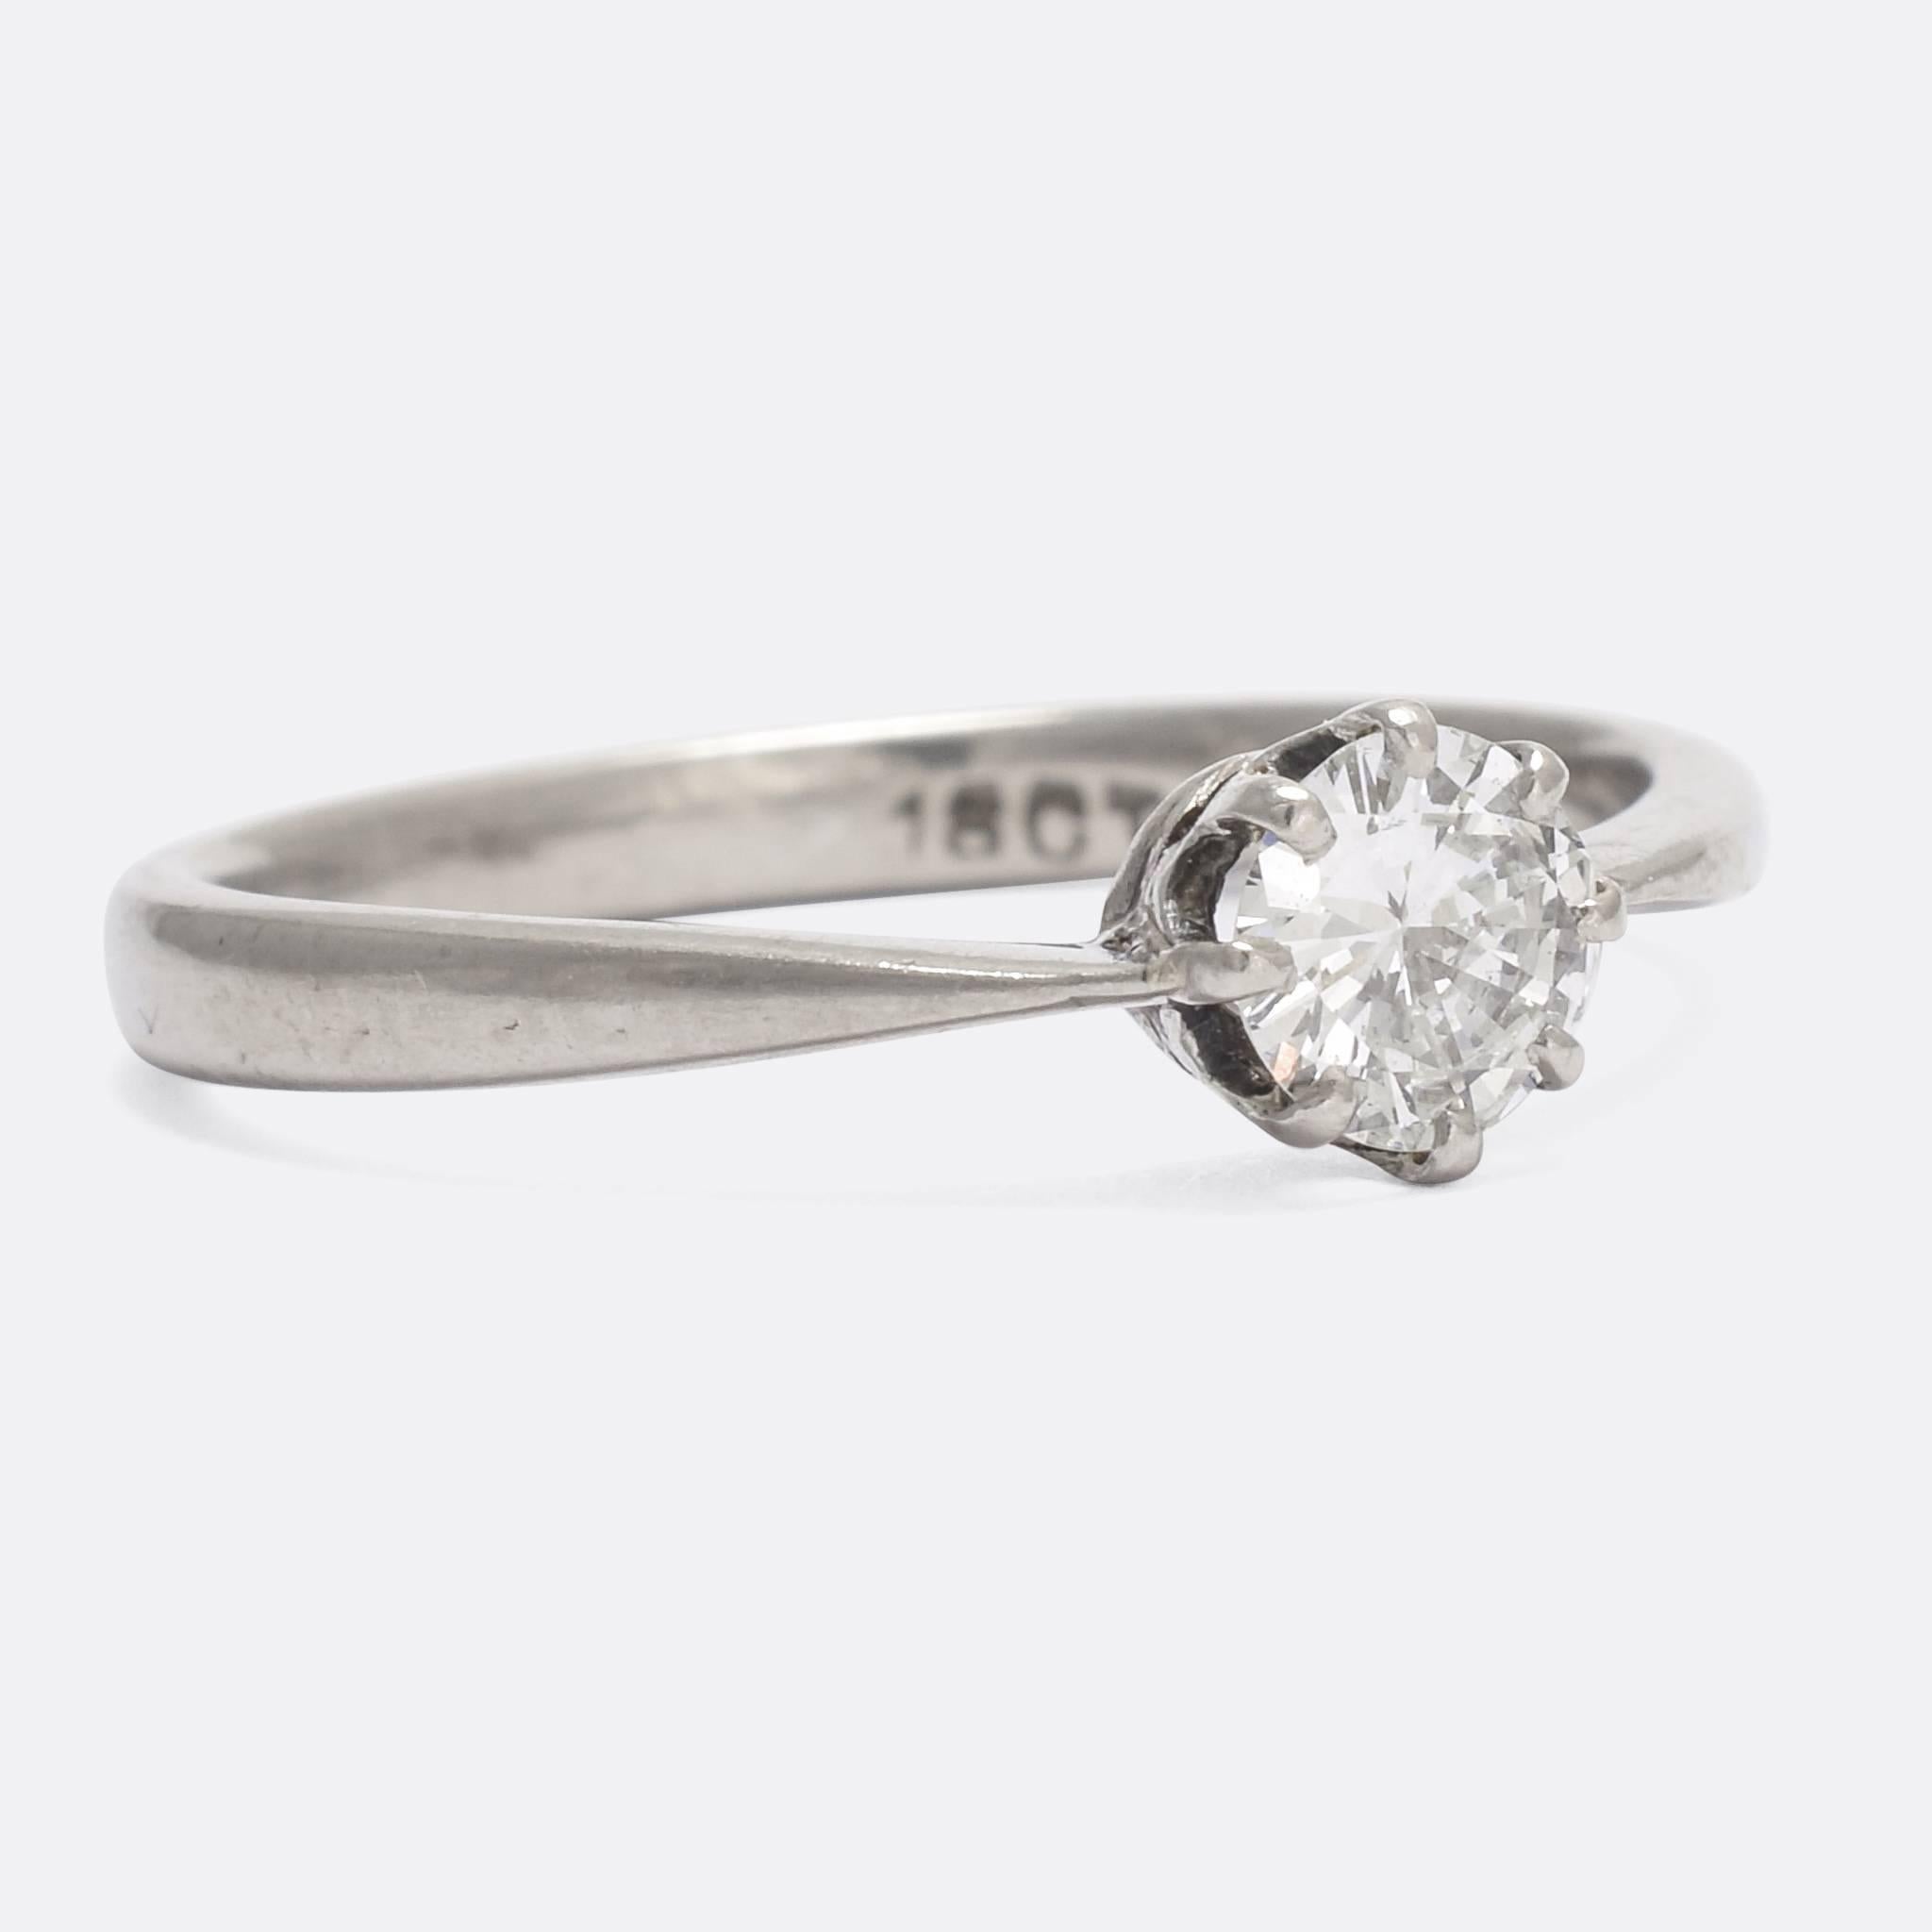 An adorable 1920s diamond solitaire ring, set with a bright .45ct transitional cut stone. The ring itself is modelled in 18k white gold, with elegant pinched shoulders and a classic 8 claw mount.

STONES
0.45 Carat Transitional Cut Diamonds - approx